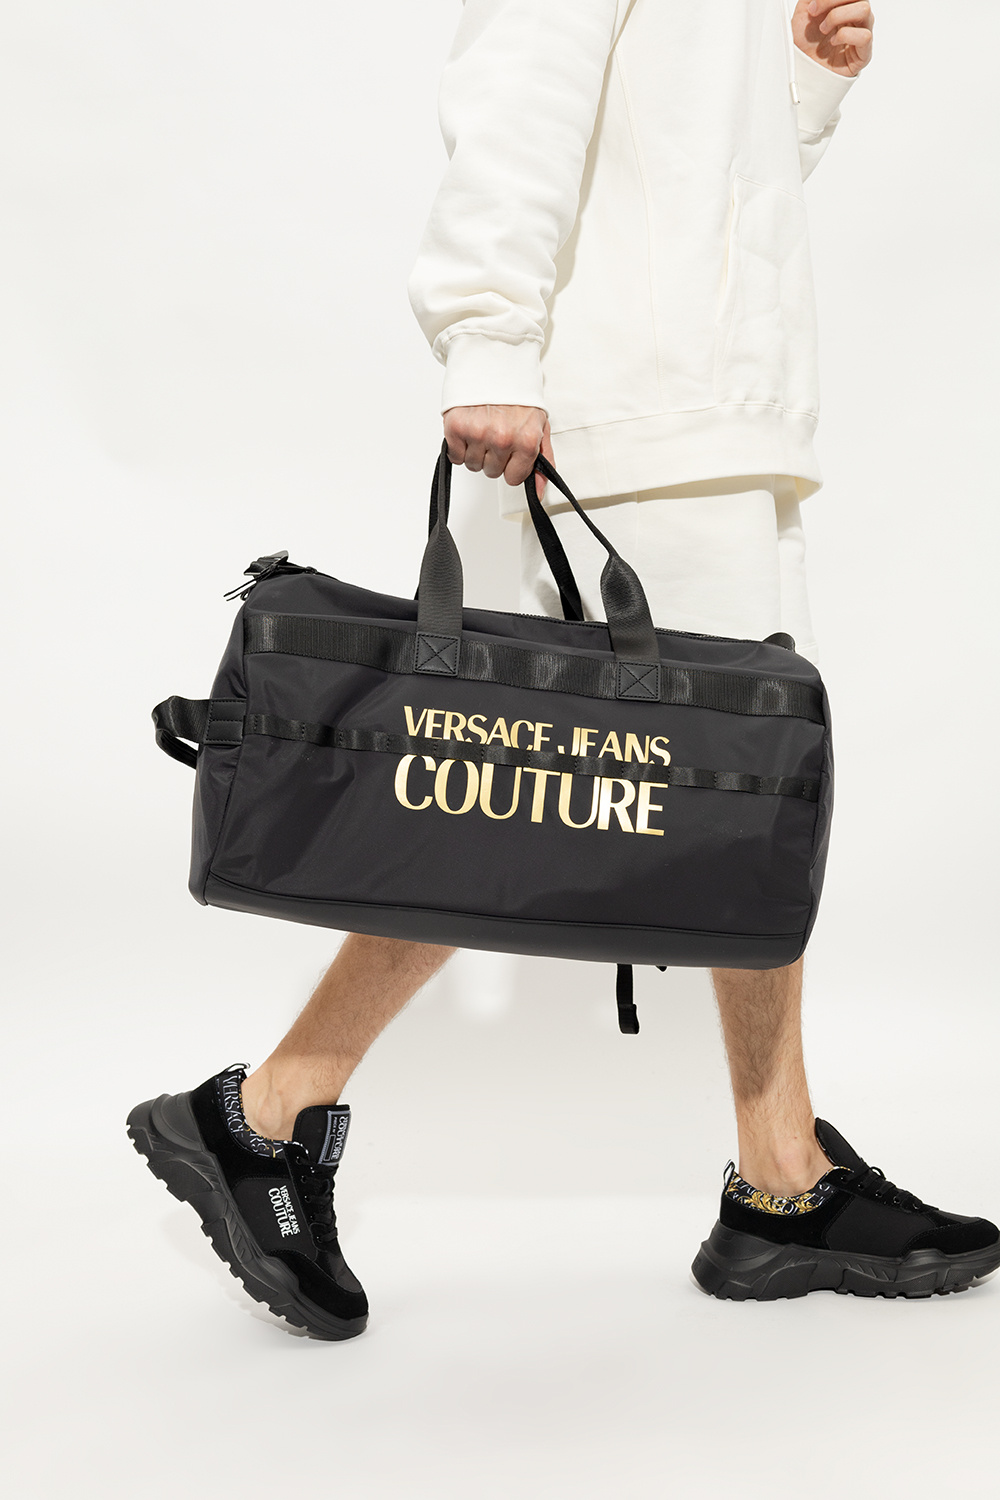 Versace Jeans Couture black bag with logo